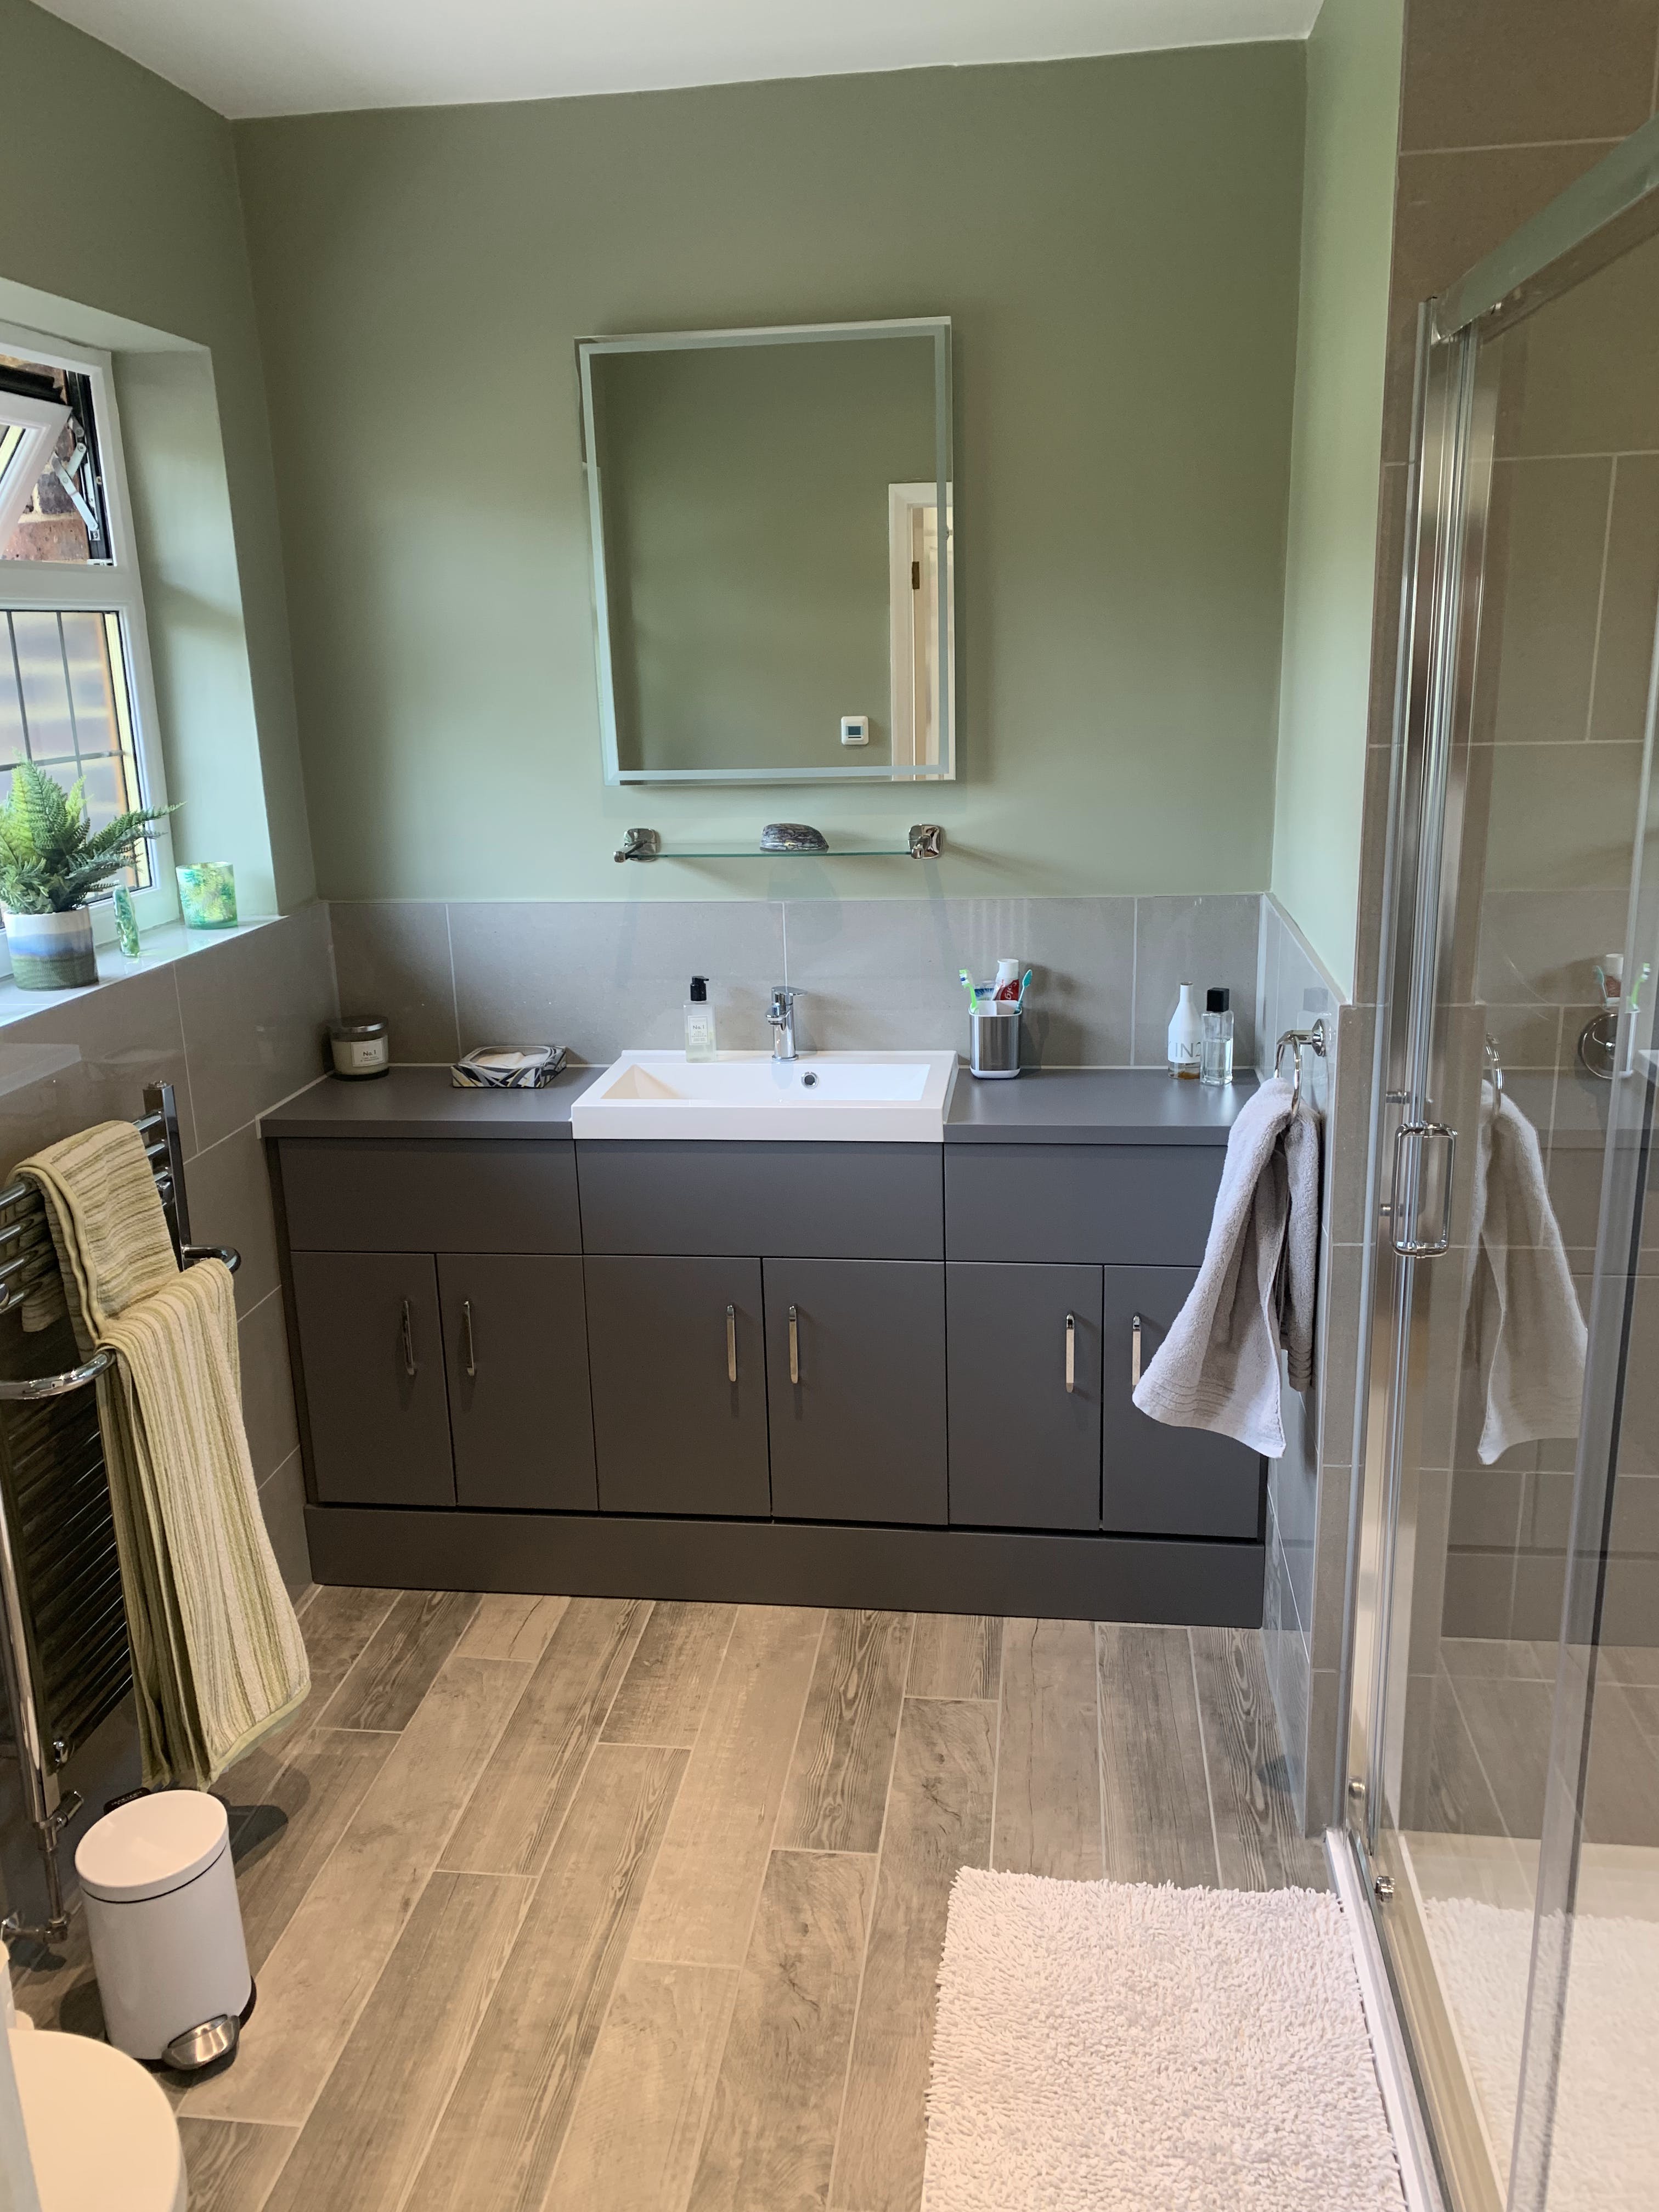 New Bathroom in Warlingham, all sanitaryware supplied by Butlers in Caterham.